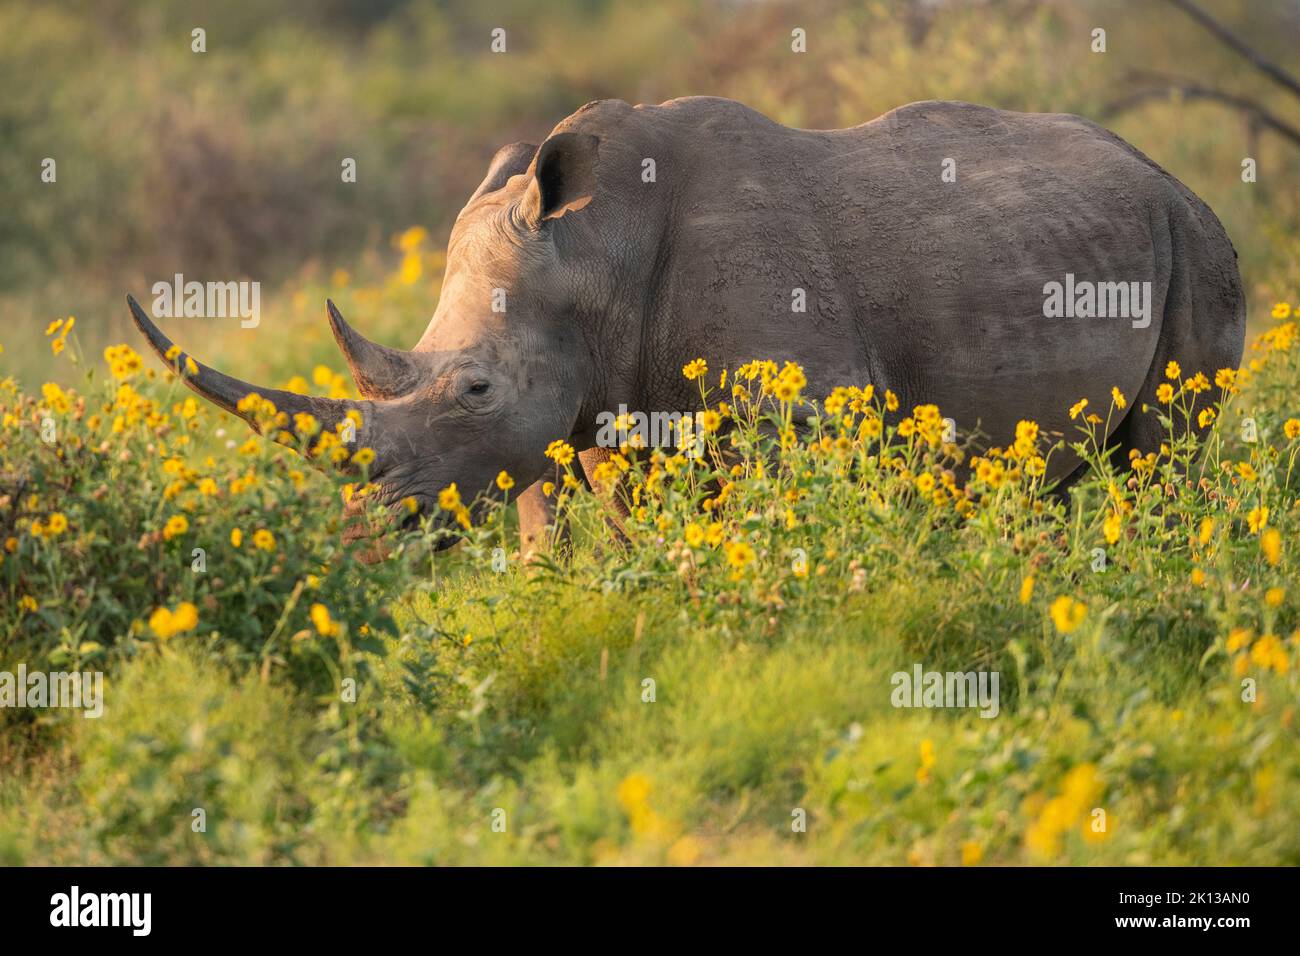 Young White Rhino with mother, Marataba, Marakele National Park, South Africa, Africa Stock Photo